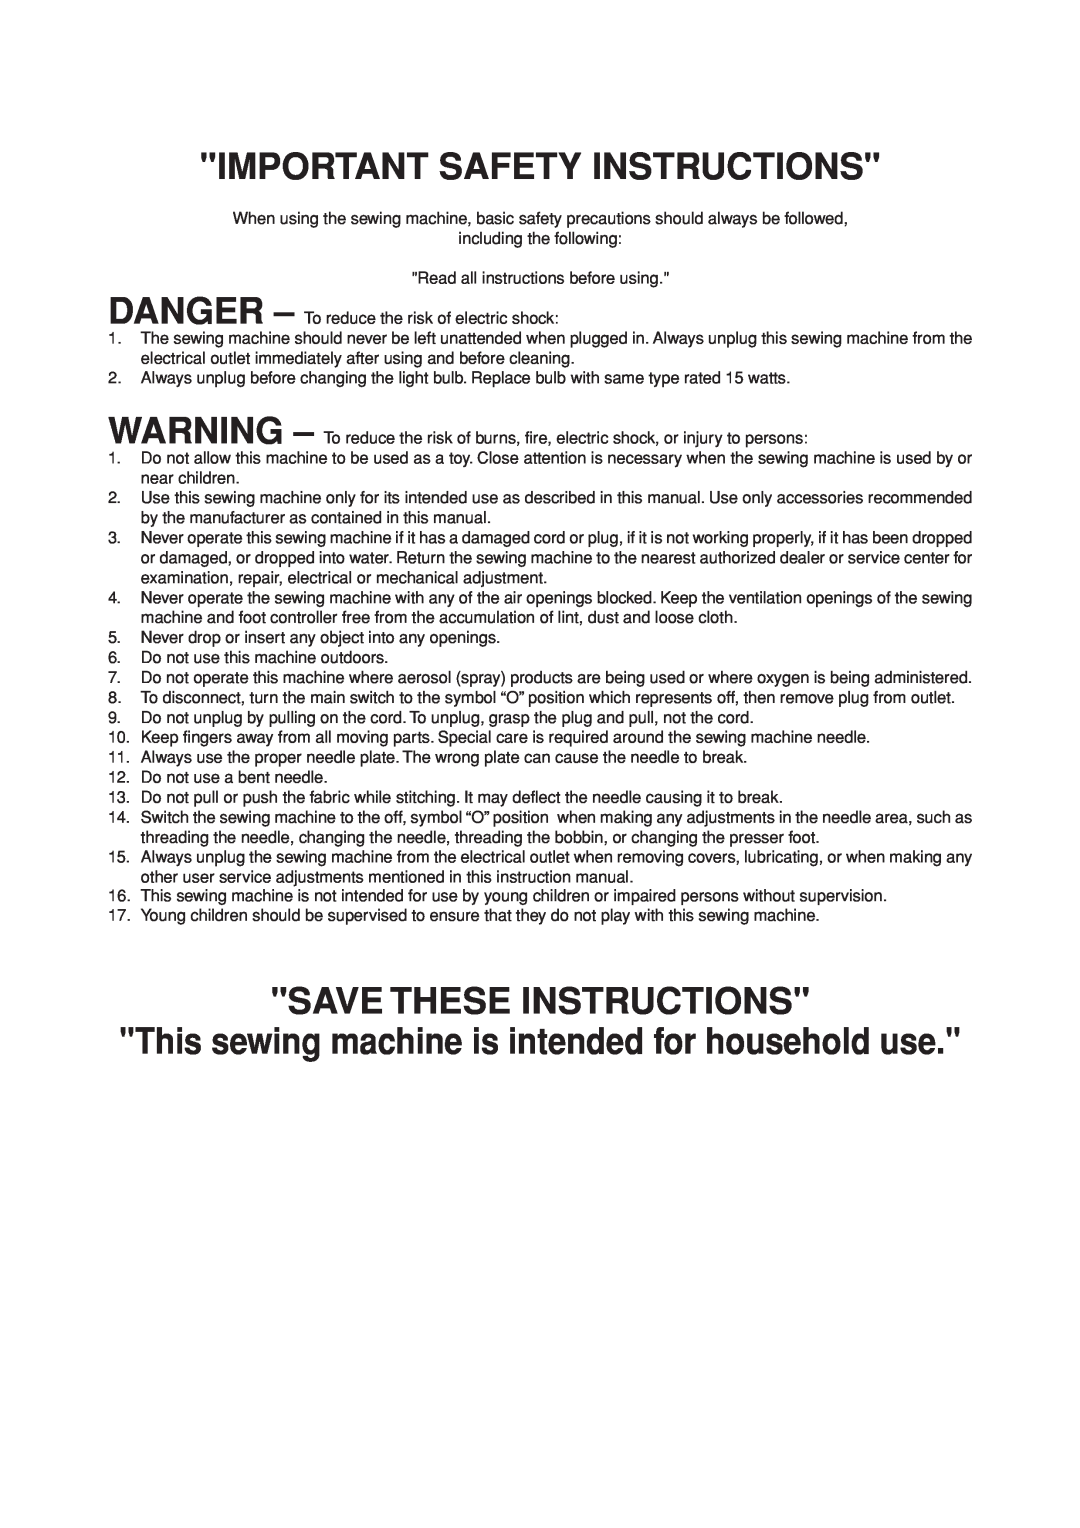 Brother LS 1520 Important Safety Instructions, Save These Instructions, This sewing machine is intended for household use 